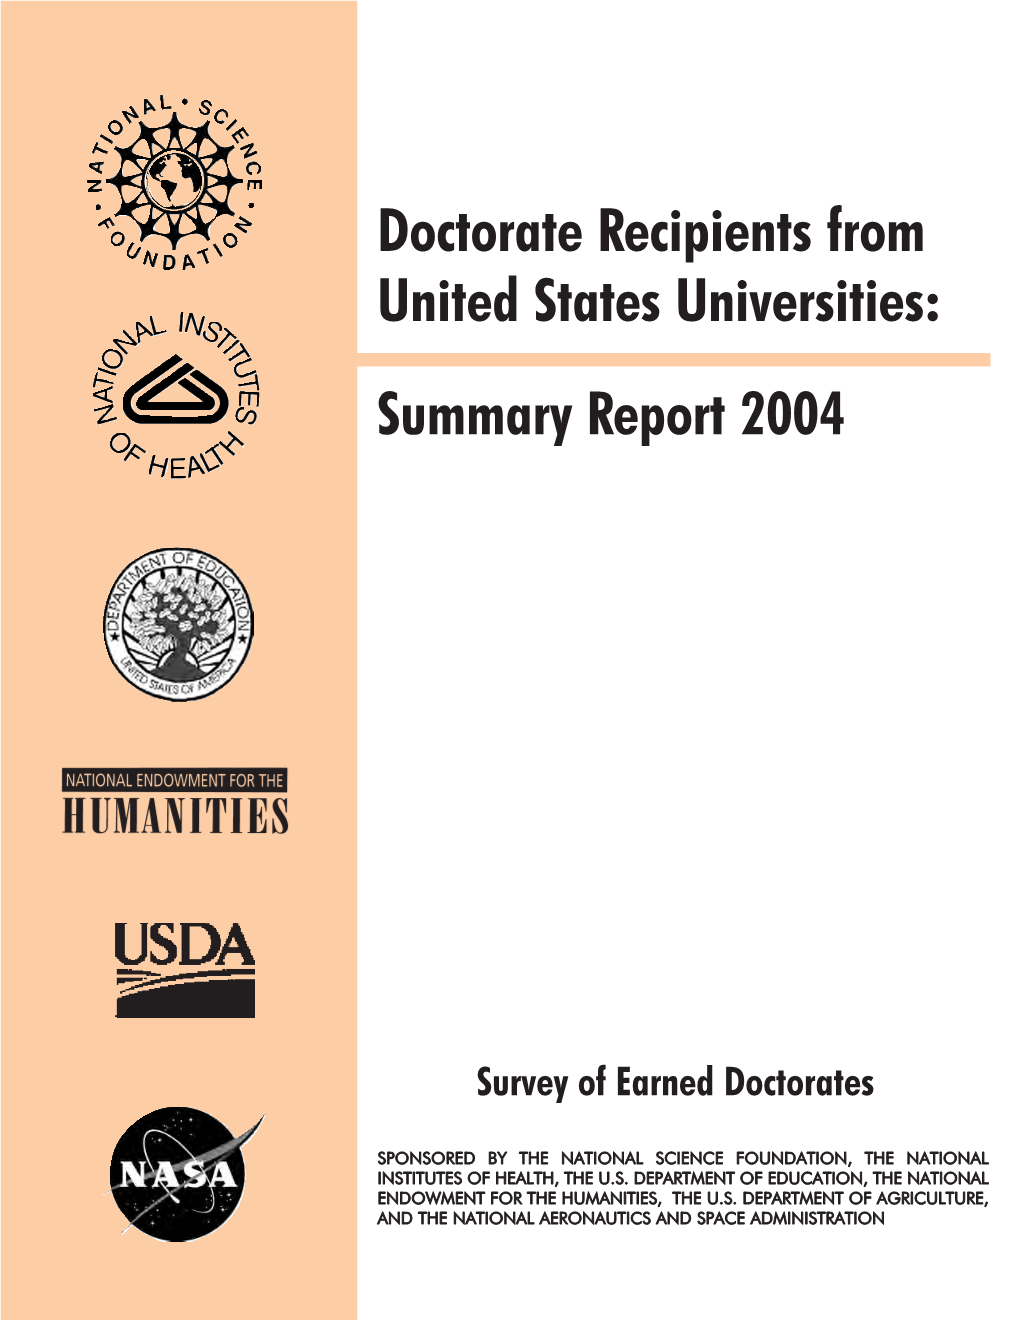 Doctorate Recipients from United States Universities: Summary Report 2004